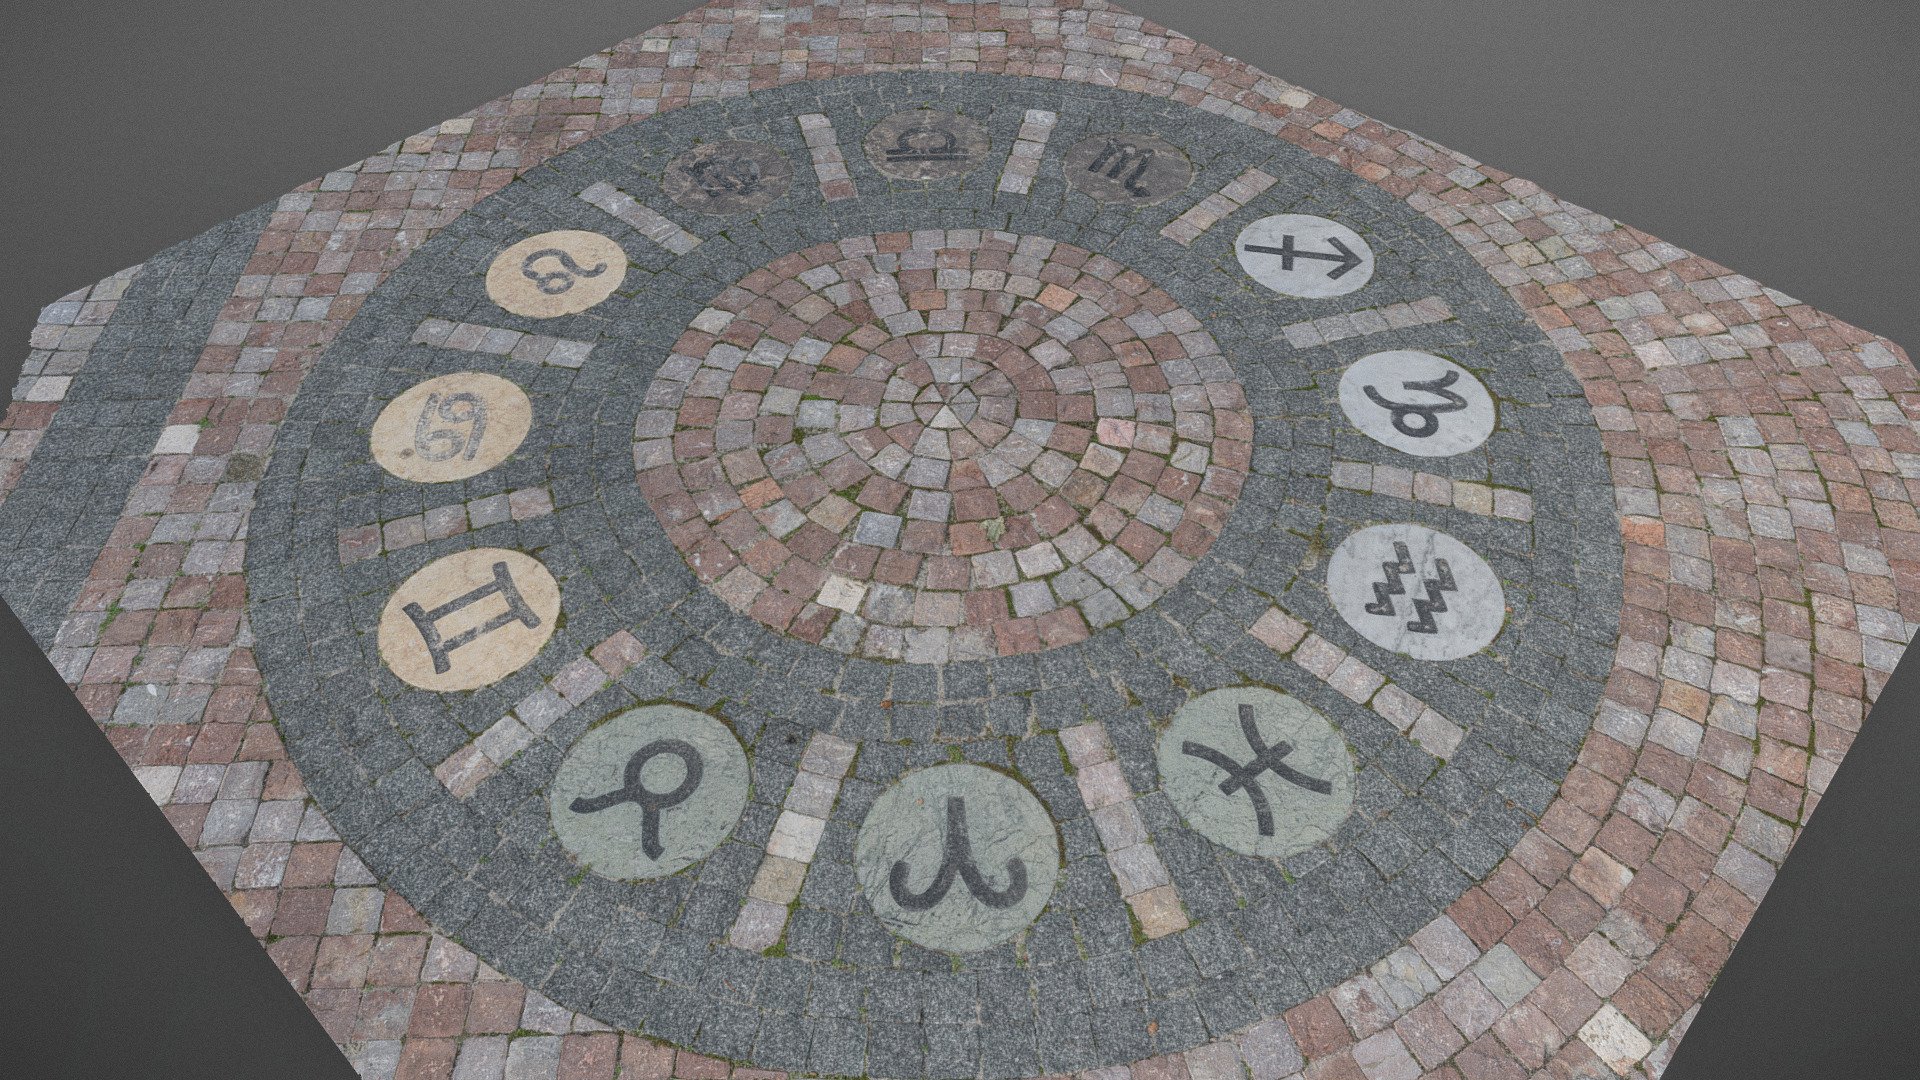 Zodiac signs wheel mosaic in cobblestone ground floor public park road way

Photogrammetry scan (180 x 36 MP, 3x8K texture + HD Normals) - Zodiac ground mosaic - Buy Royalty Free 3D model by matousekfoto 3d model